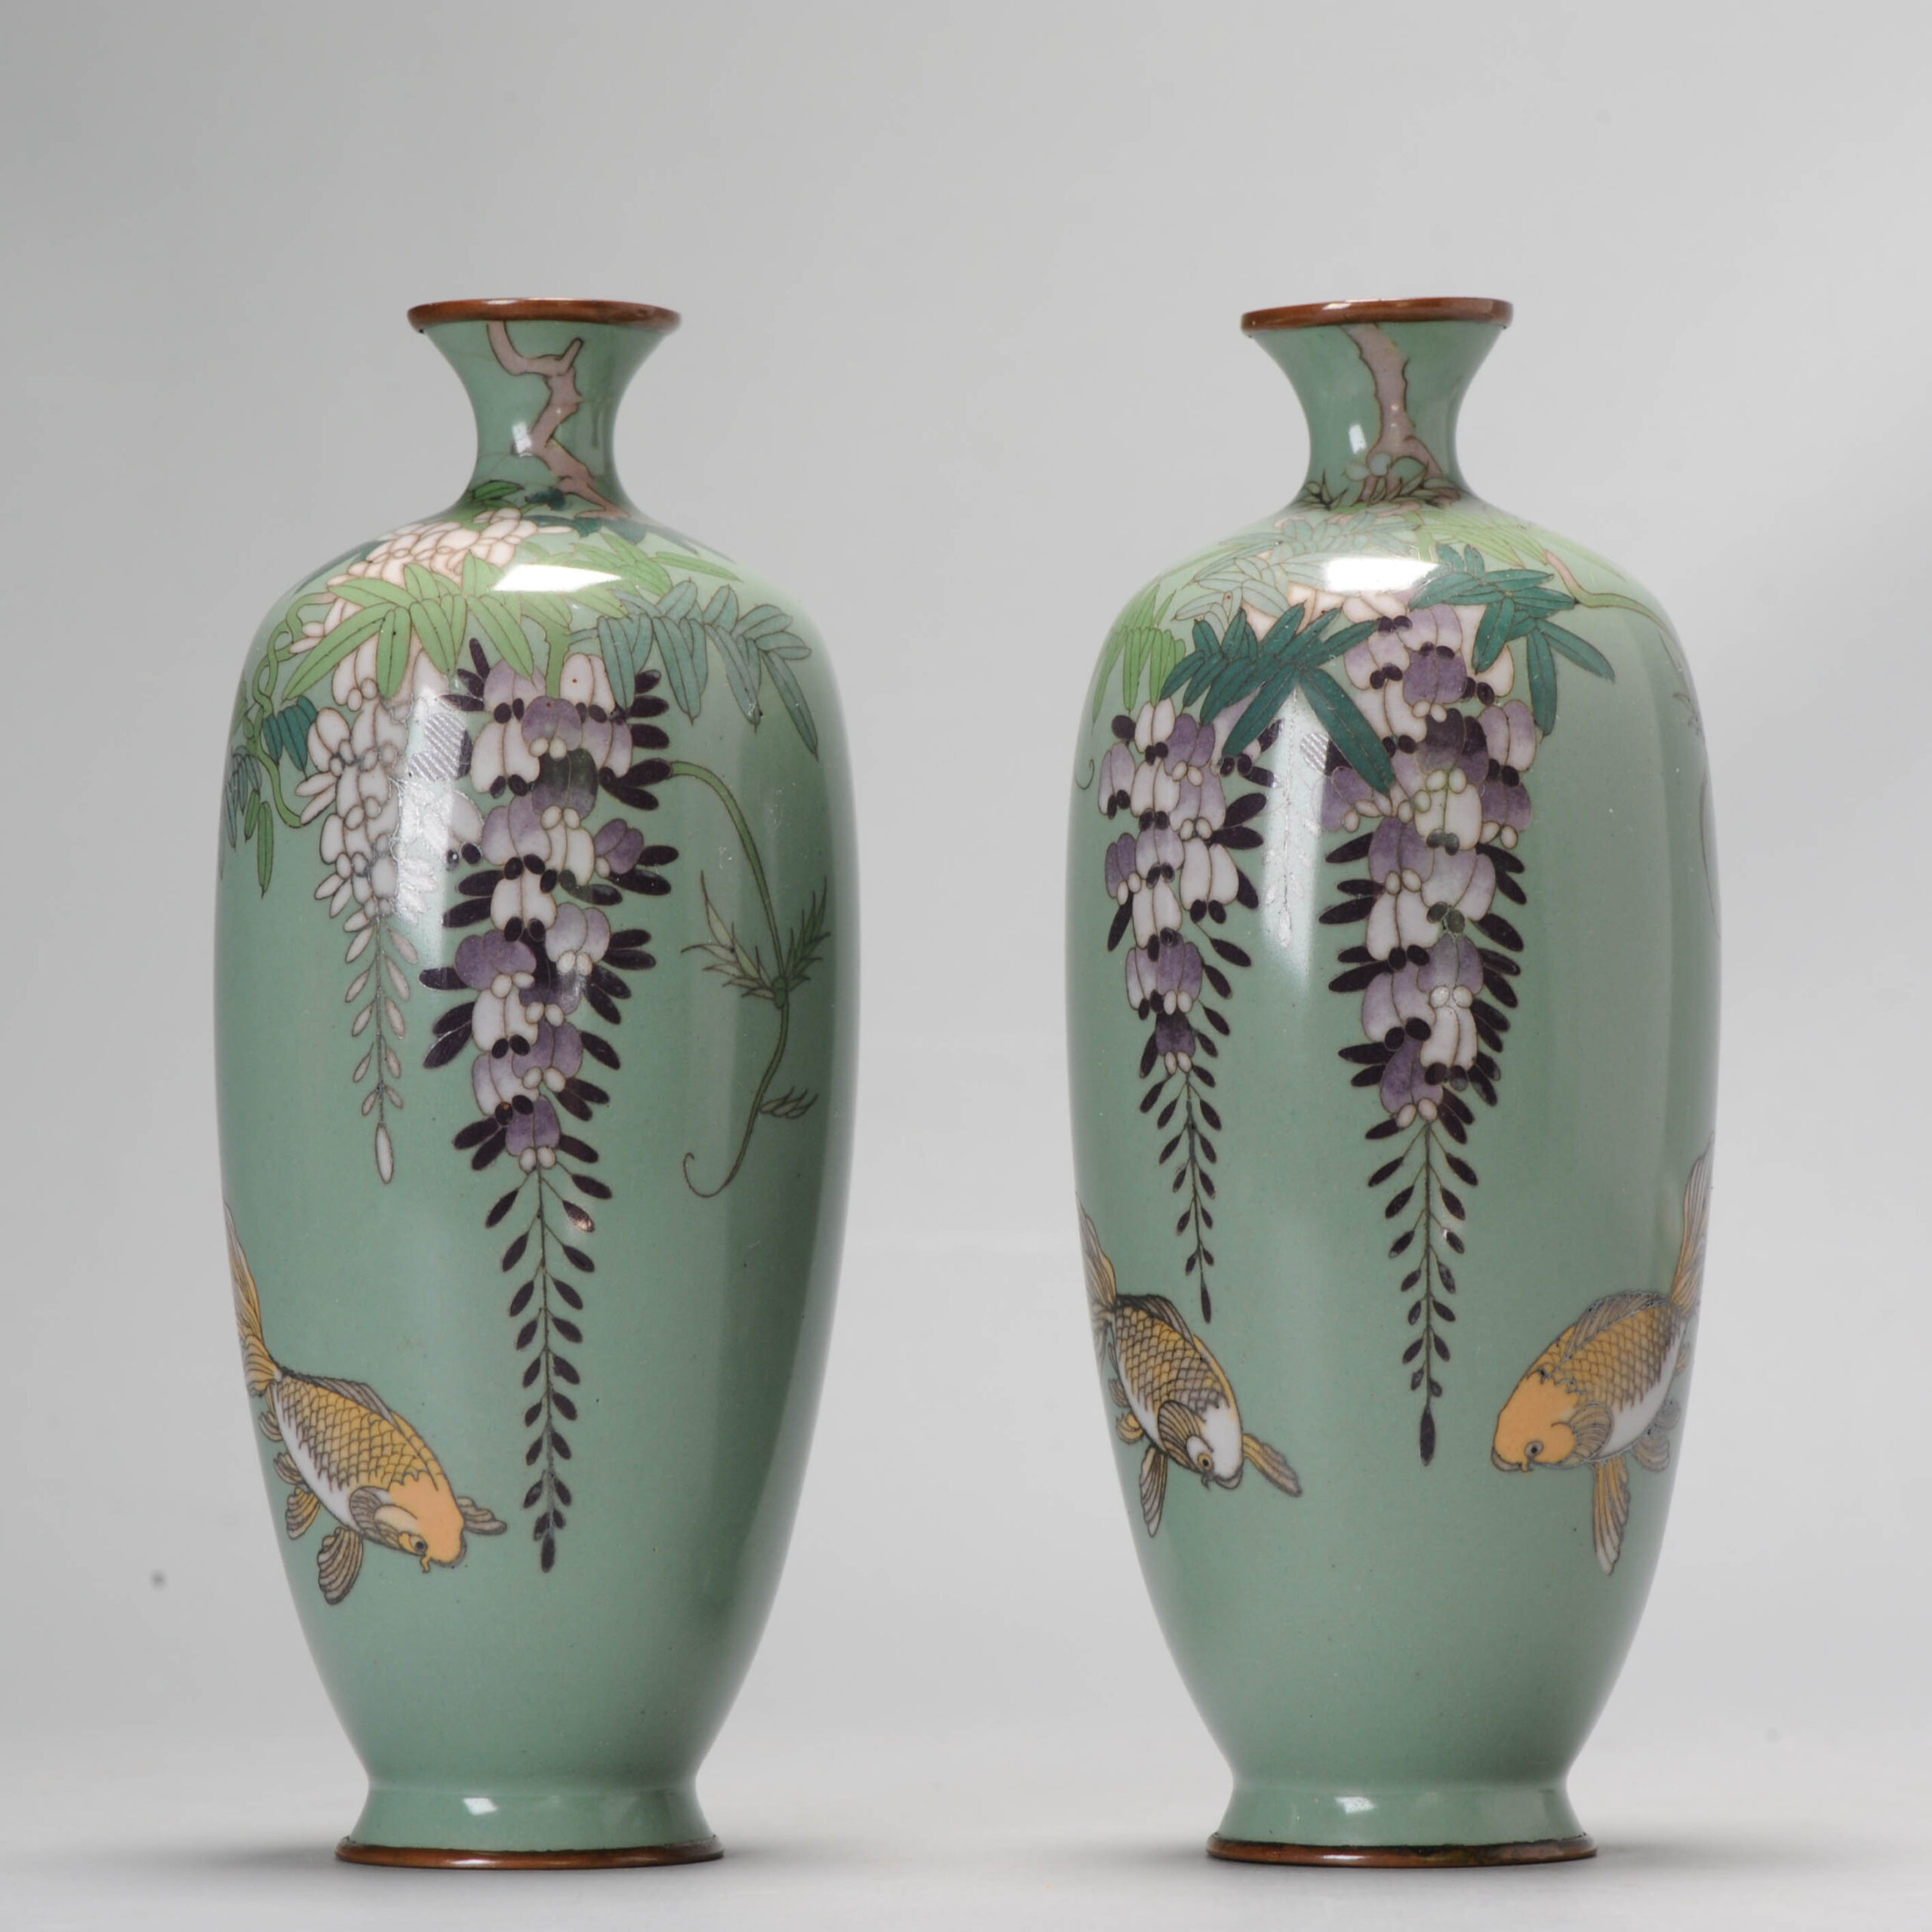 A Pair of Vases with Wisteria flowers and Goldfish on green cloisonné enamel Meiji era (1868-1912)